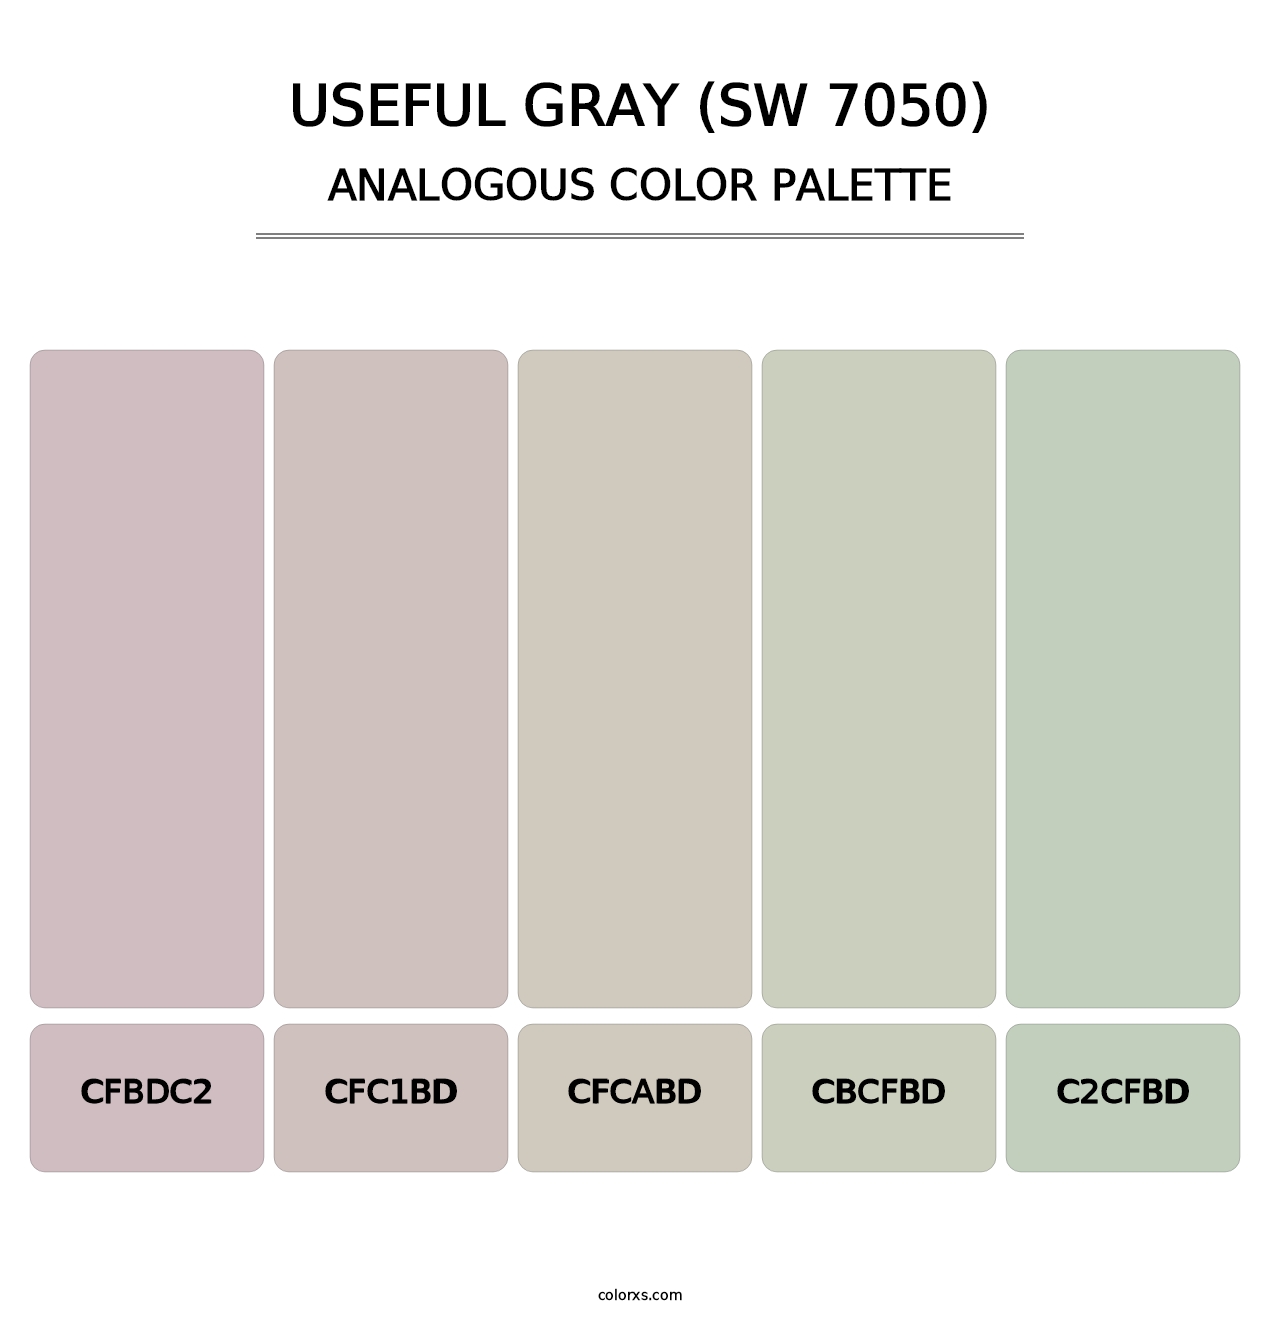 Useful Gray (SW 7050) - Analogous Color Palette